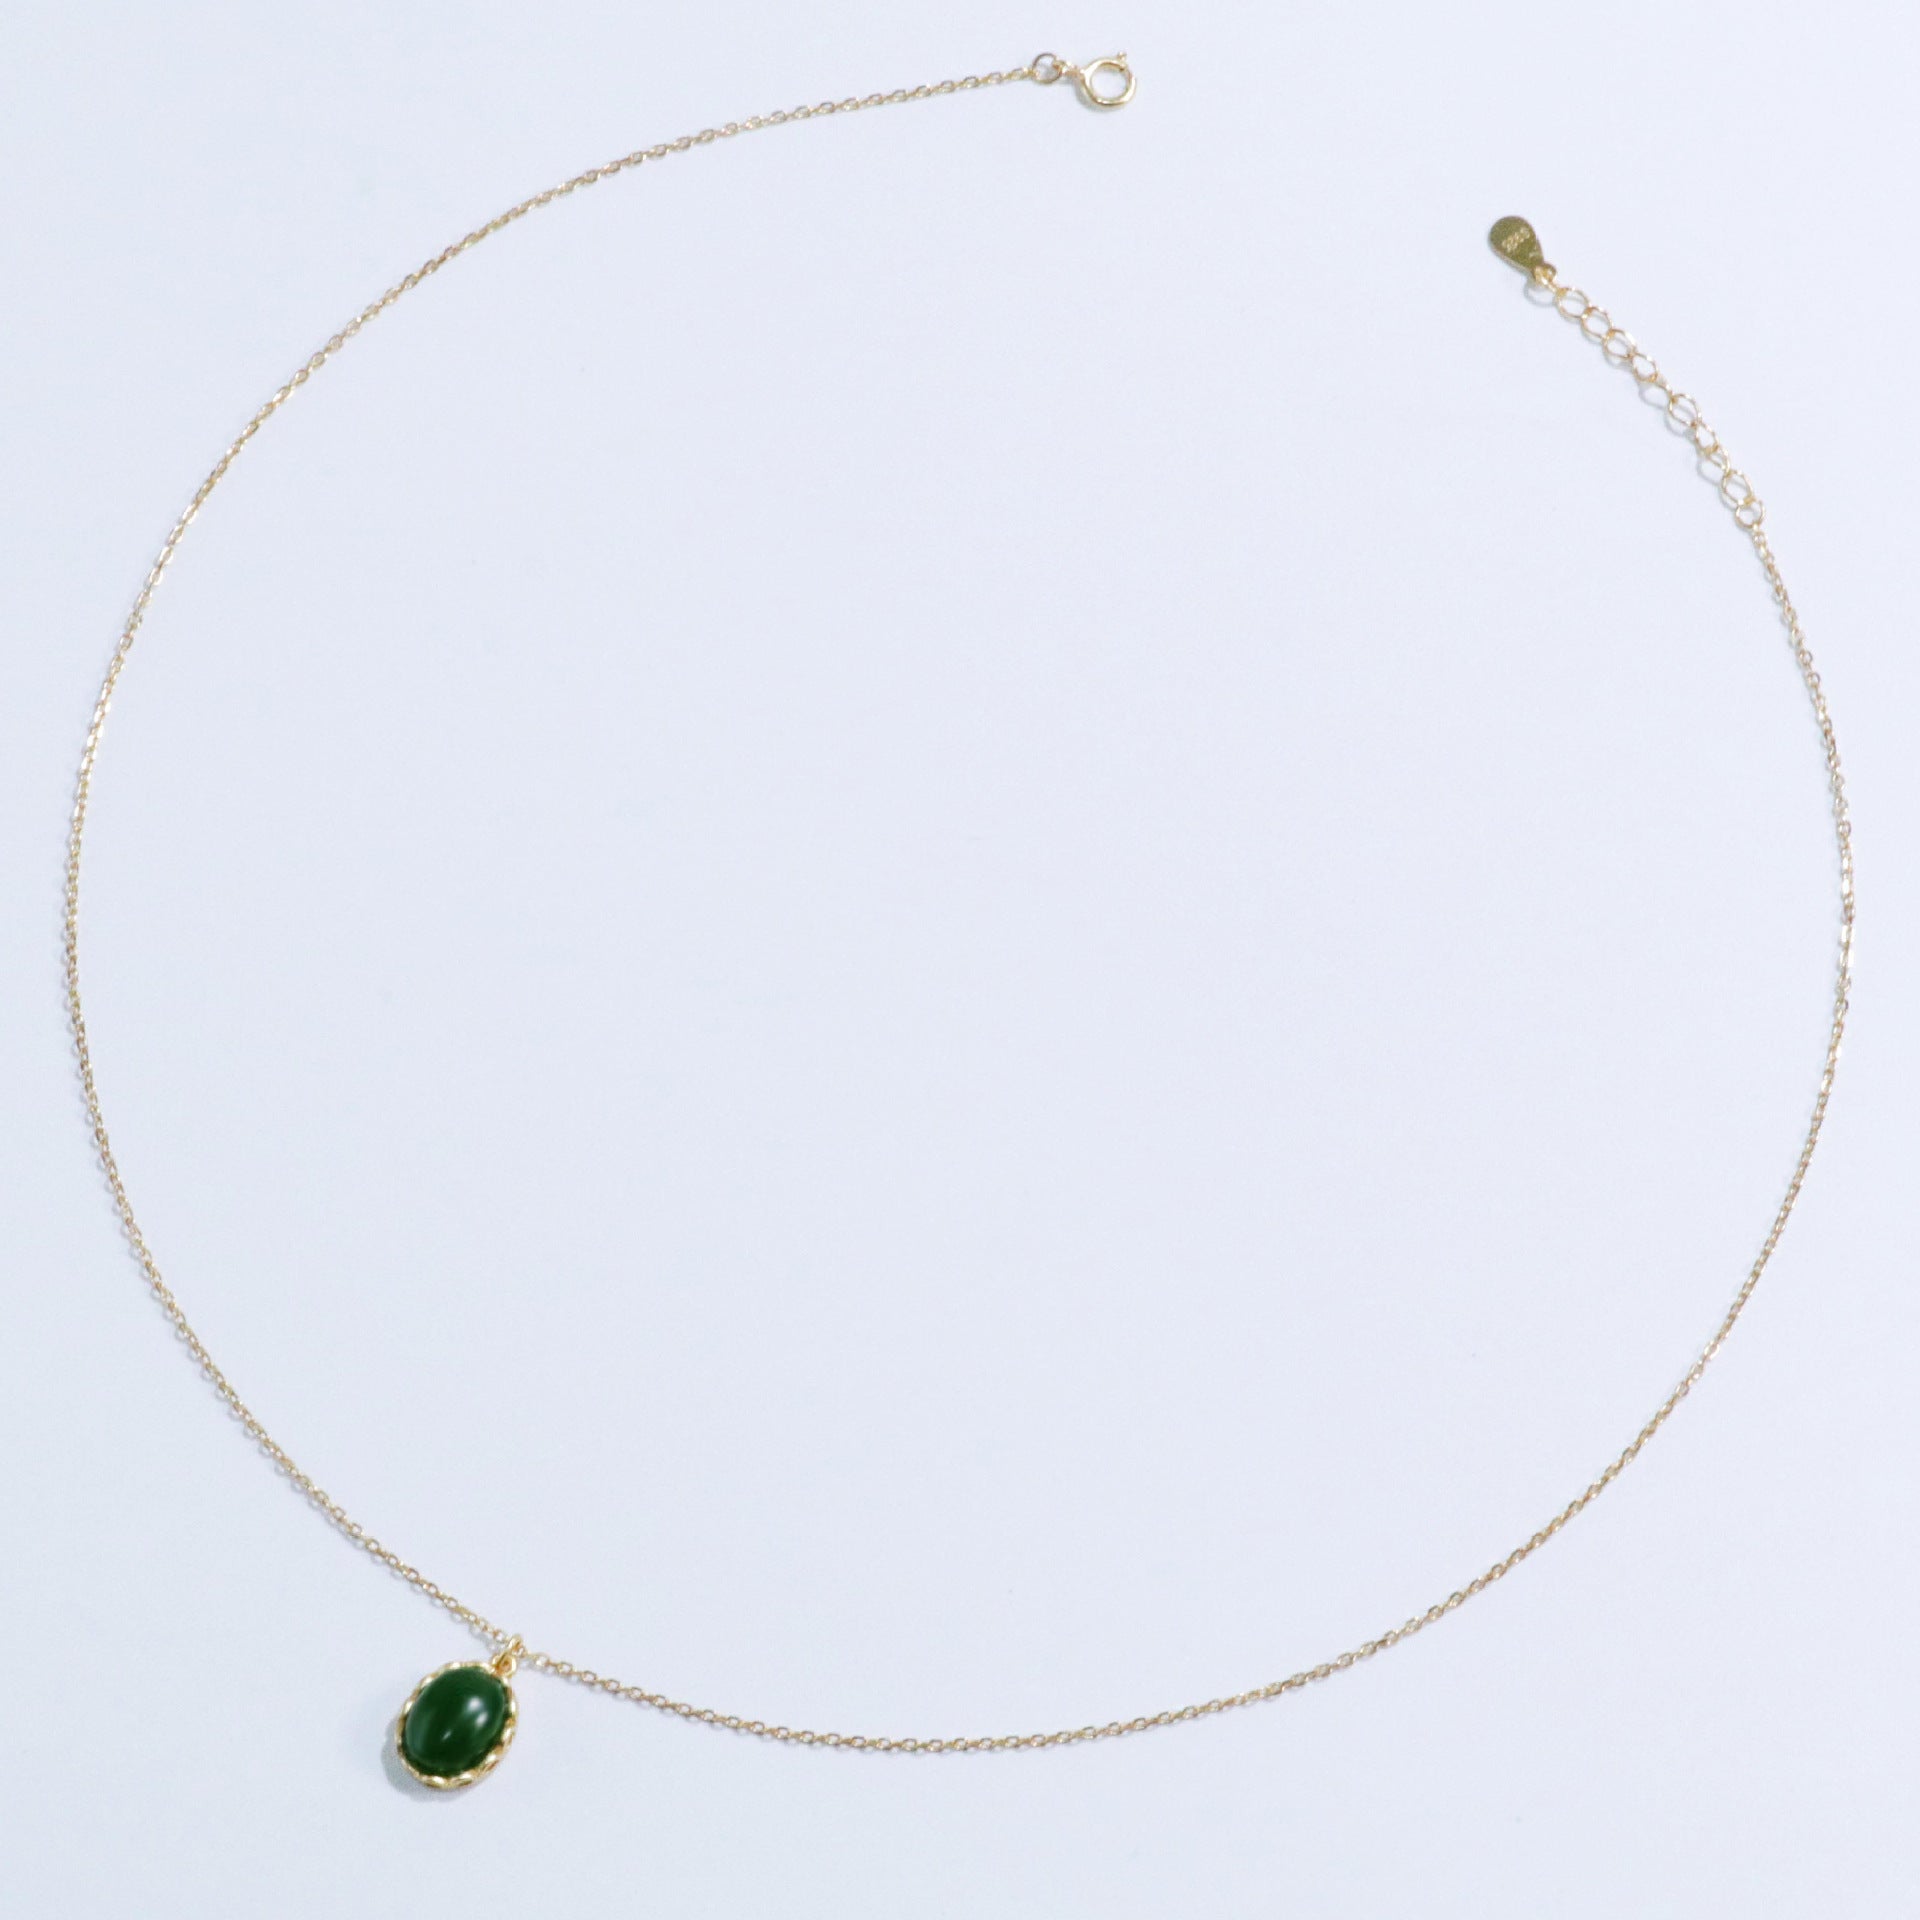 【Agate】Ellipse Round Green Agate Necklace